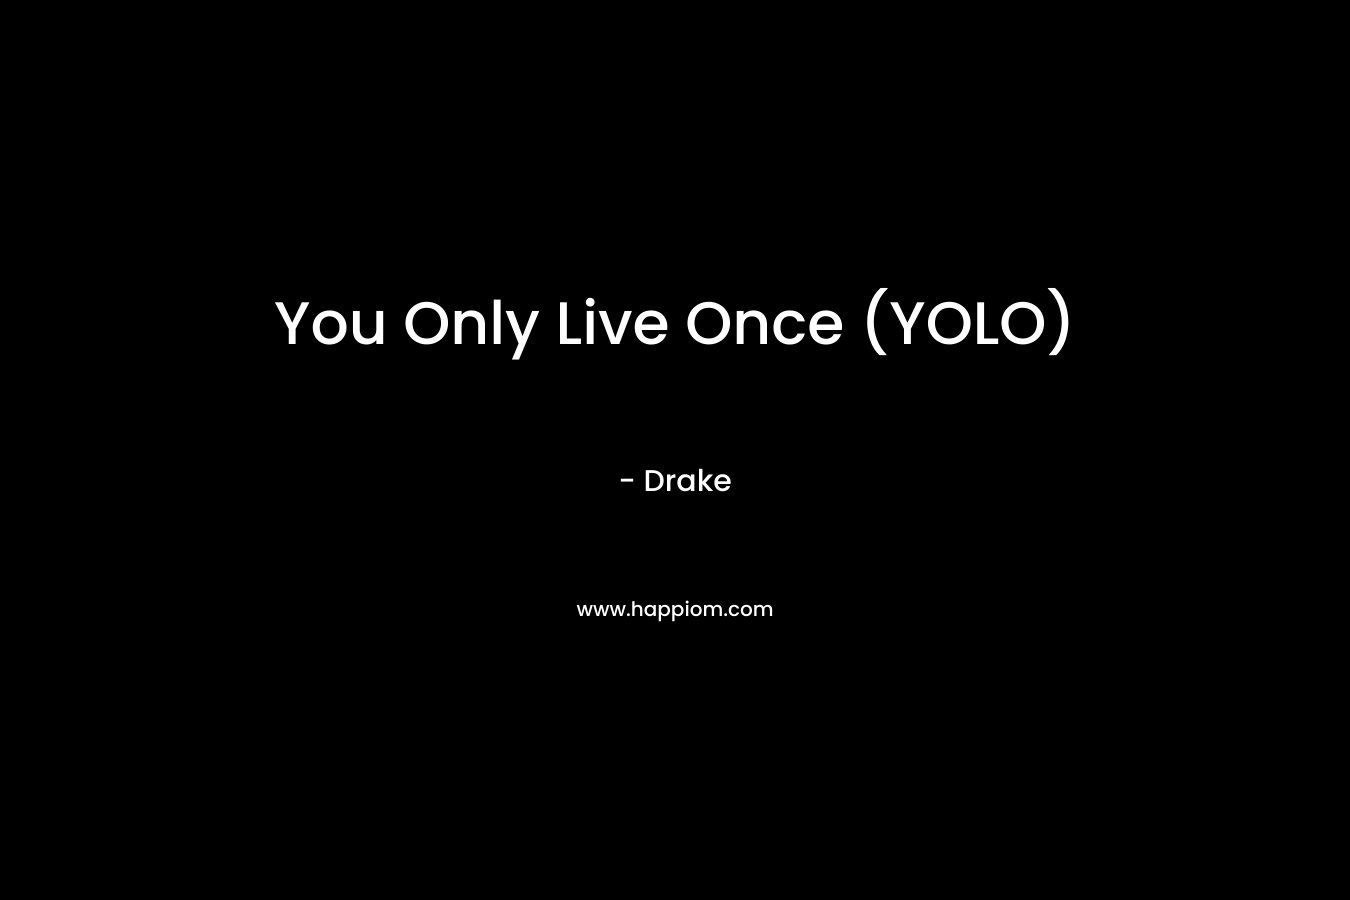 You Only Live Once (YOLO)